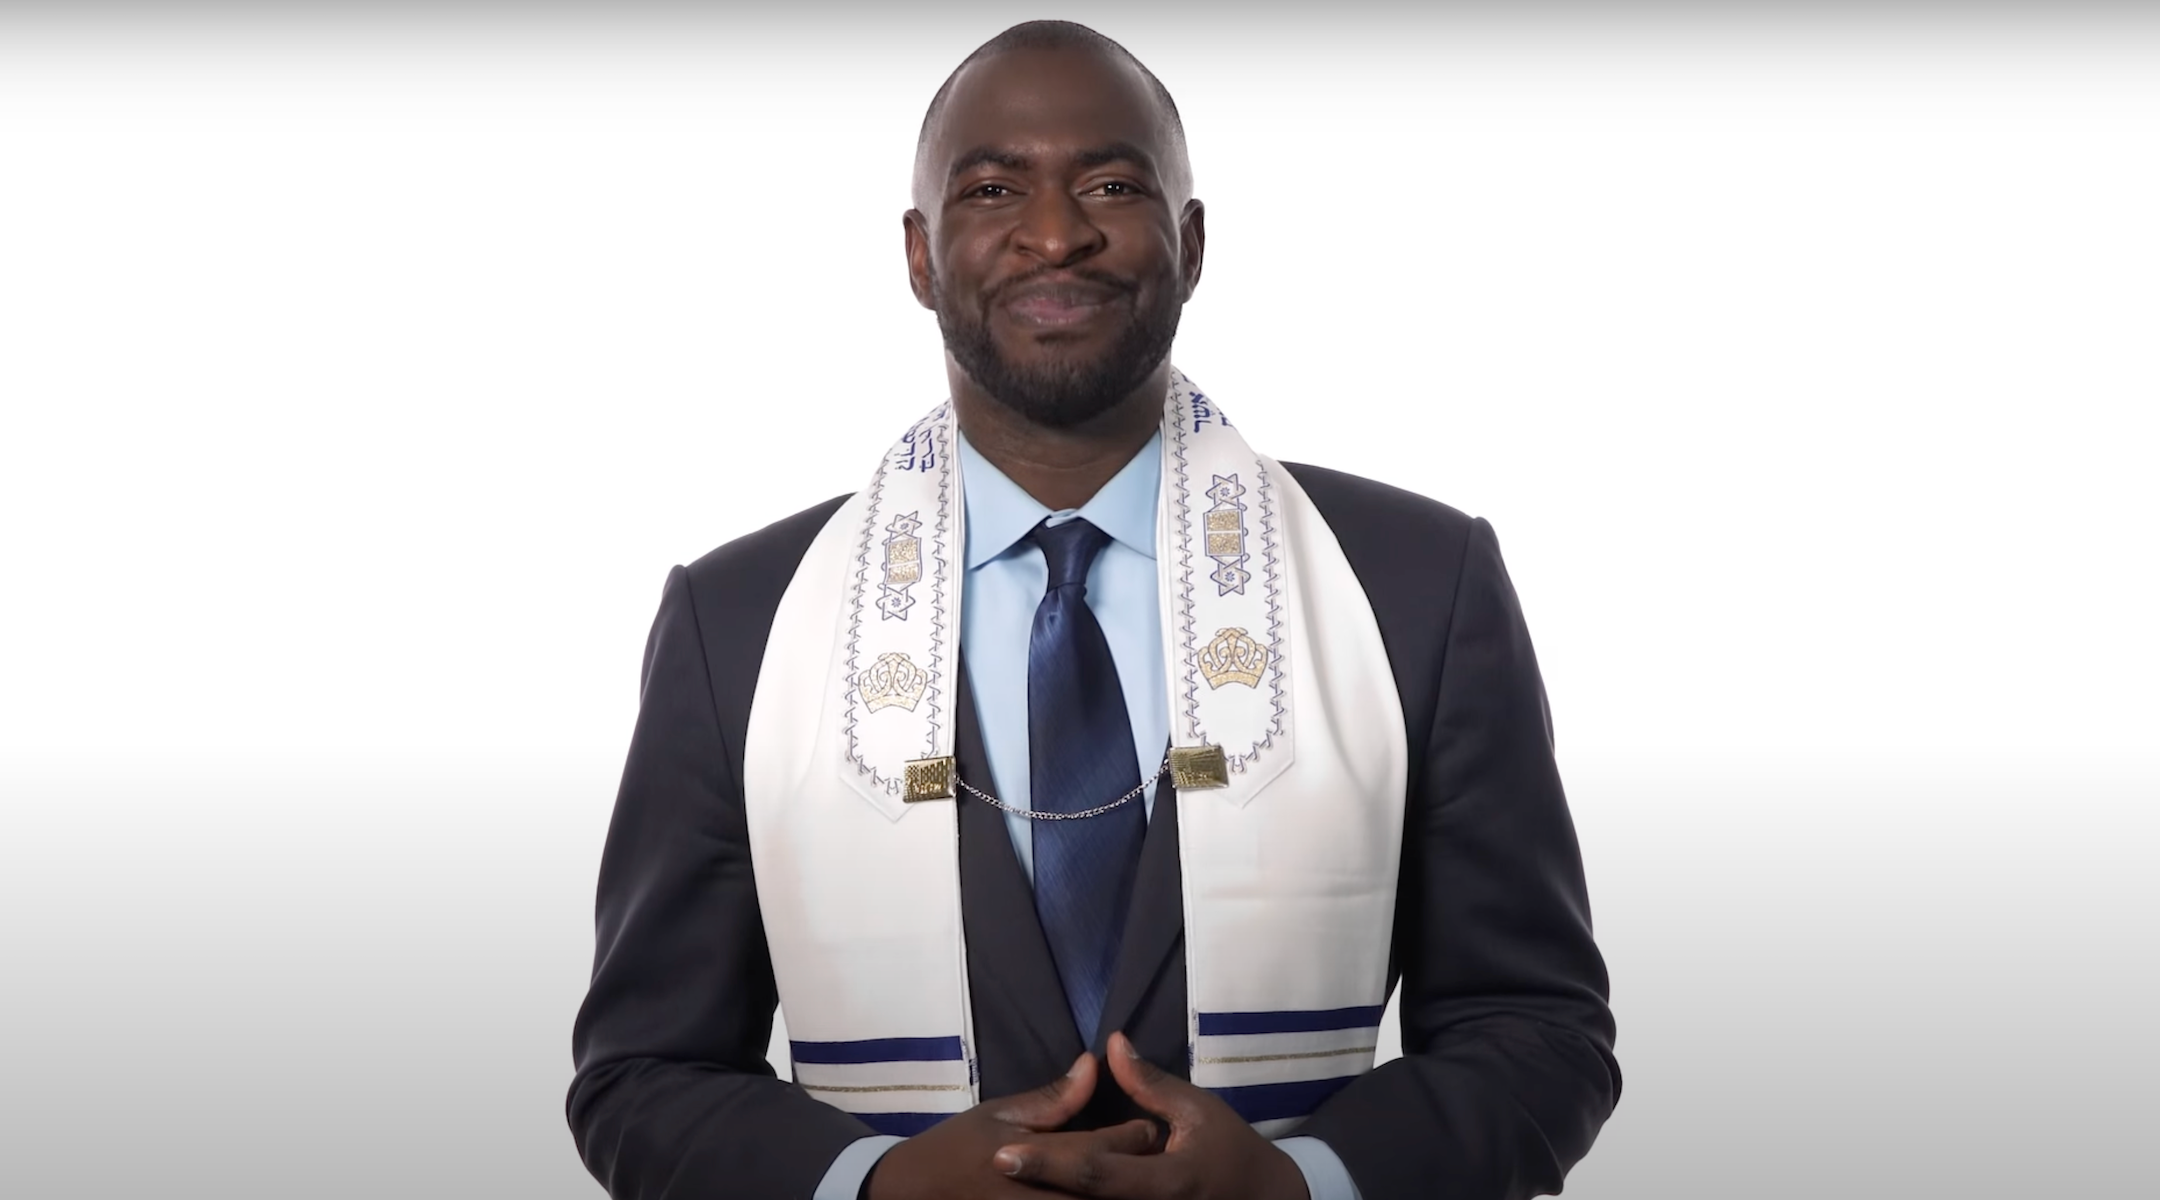 A man in a tallit on a white background